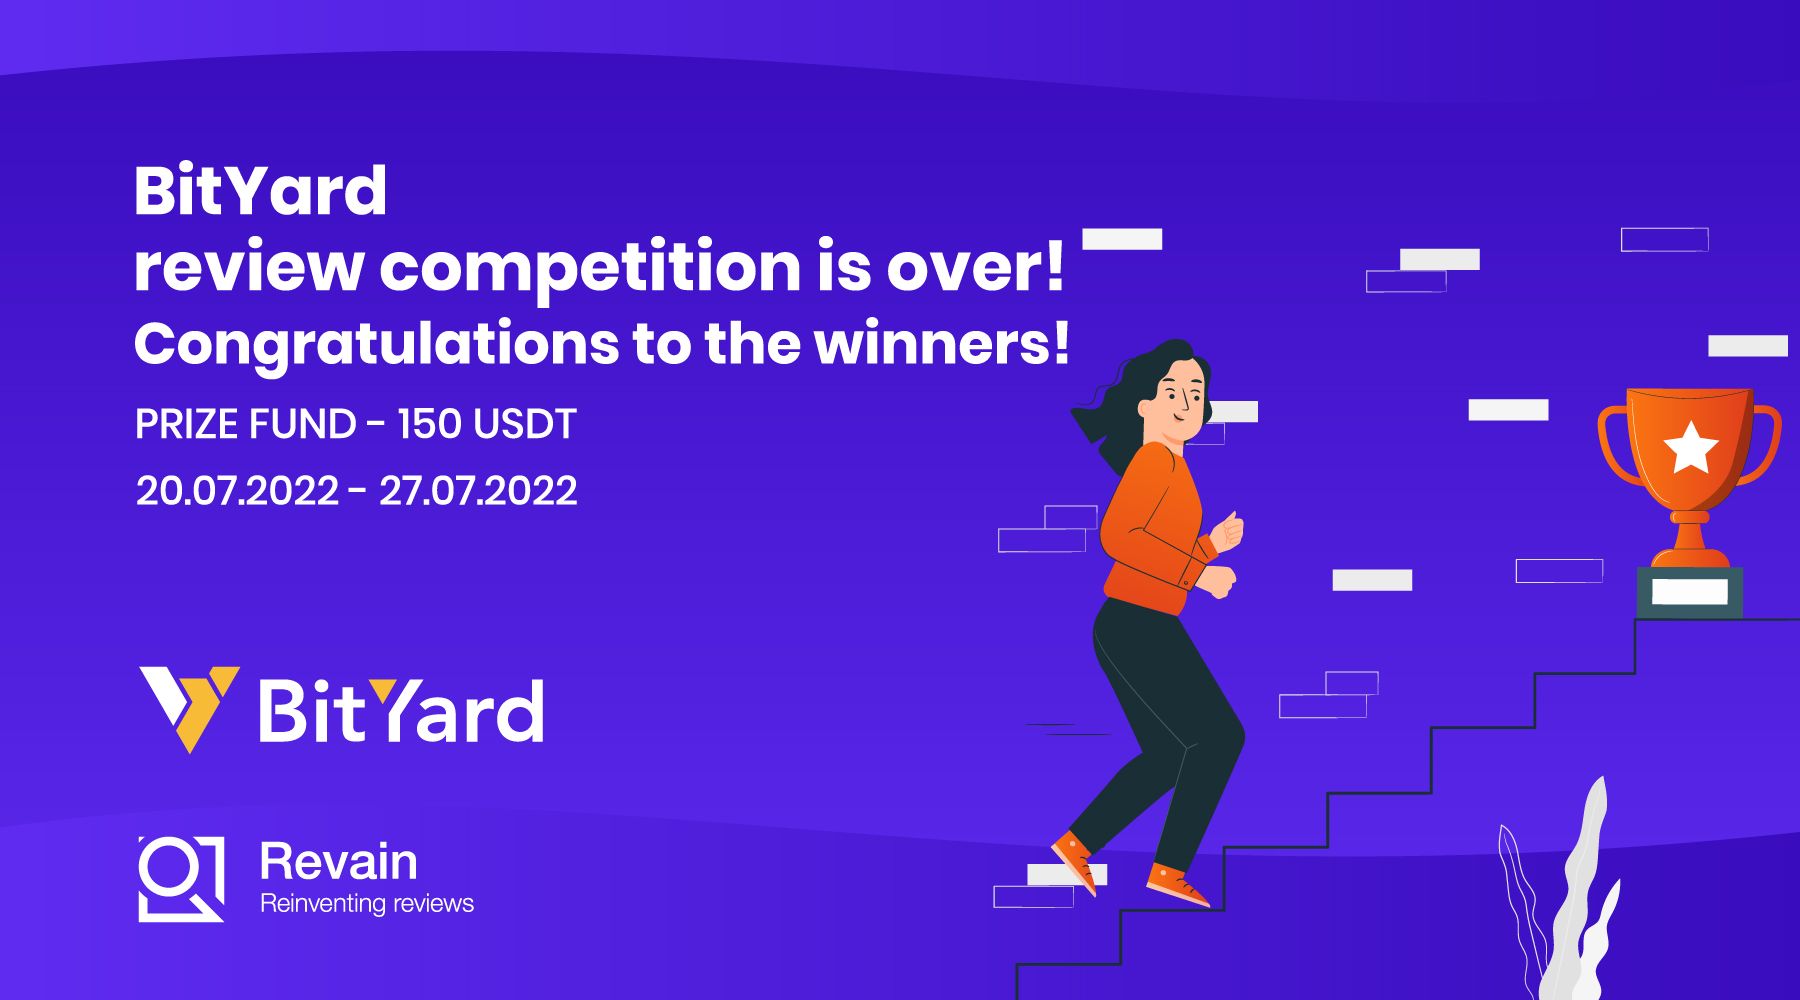 Article BitYard review competition is over! Congratulations to the winners!